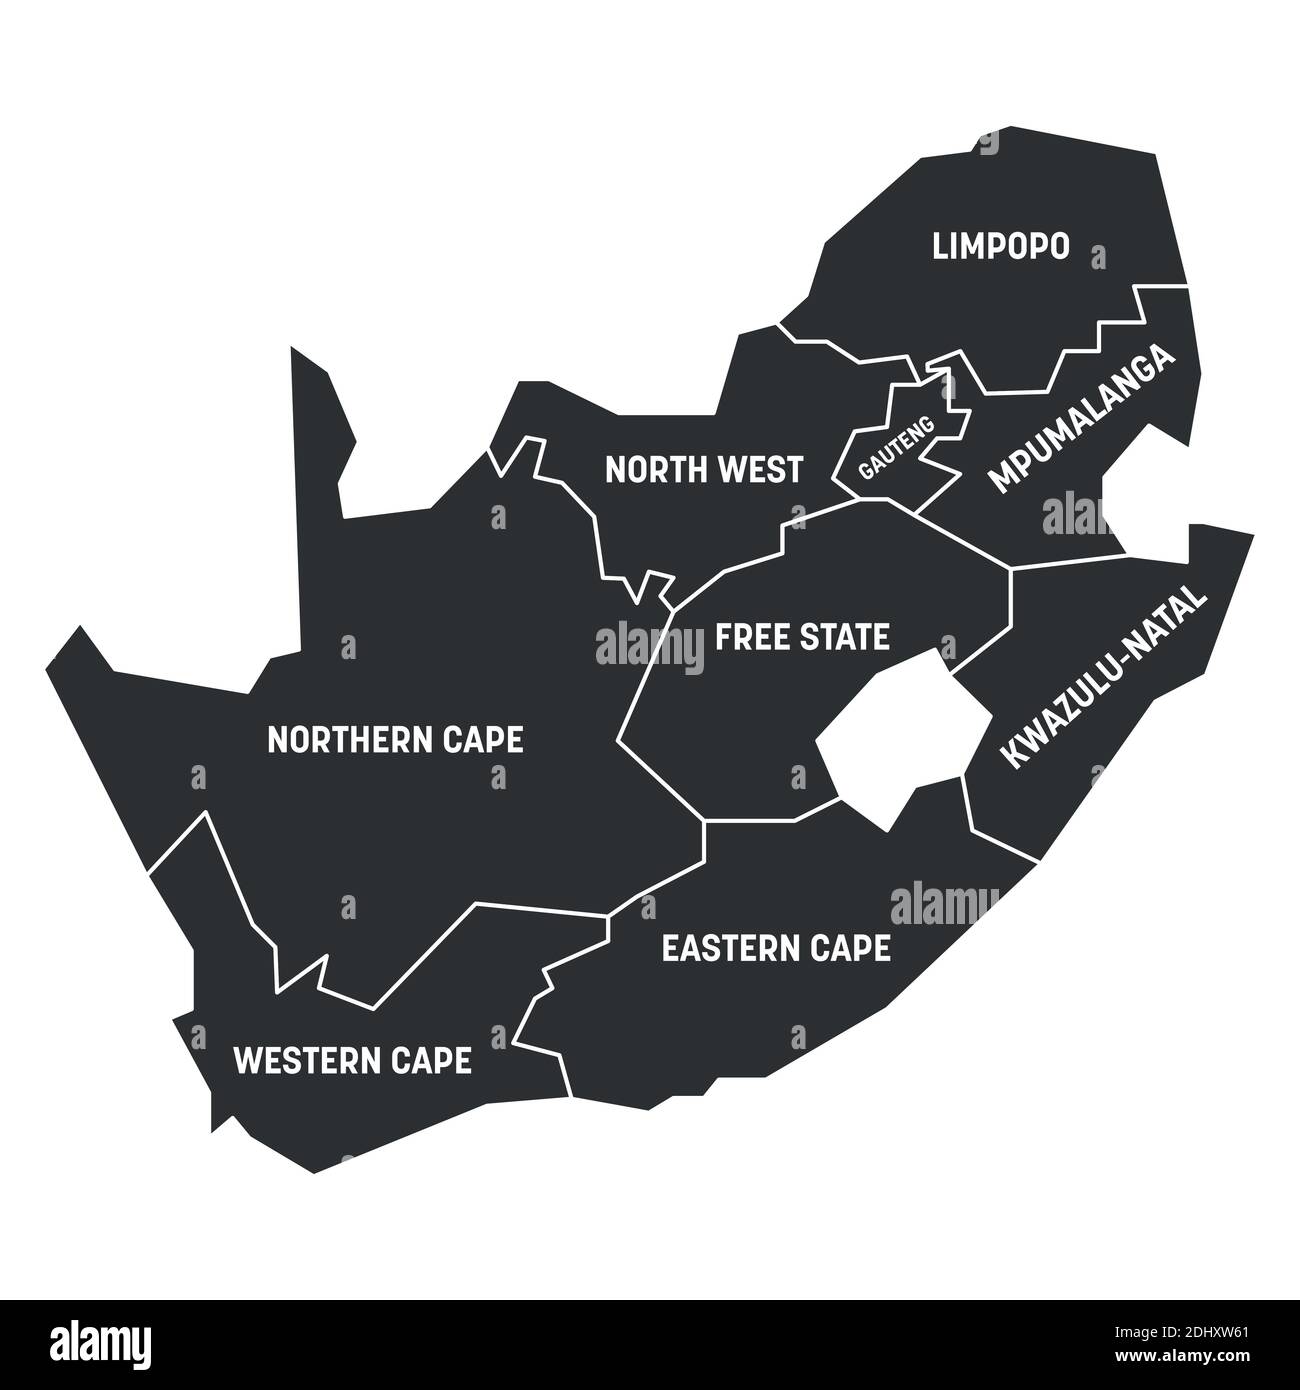 Gray political map of South Africa, RSA. Administrative divisions - provinces. Simple flat vector map with labels. Stock Vector